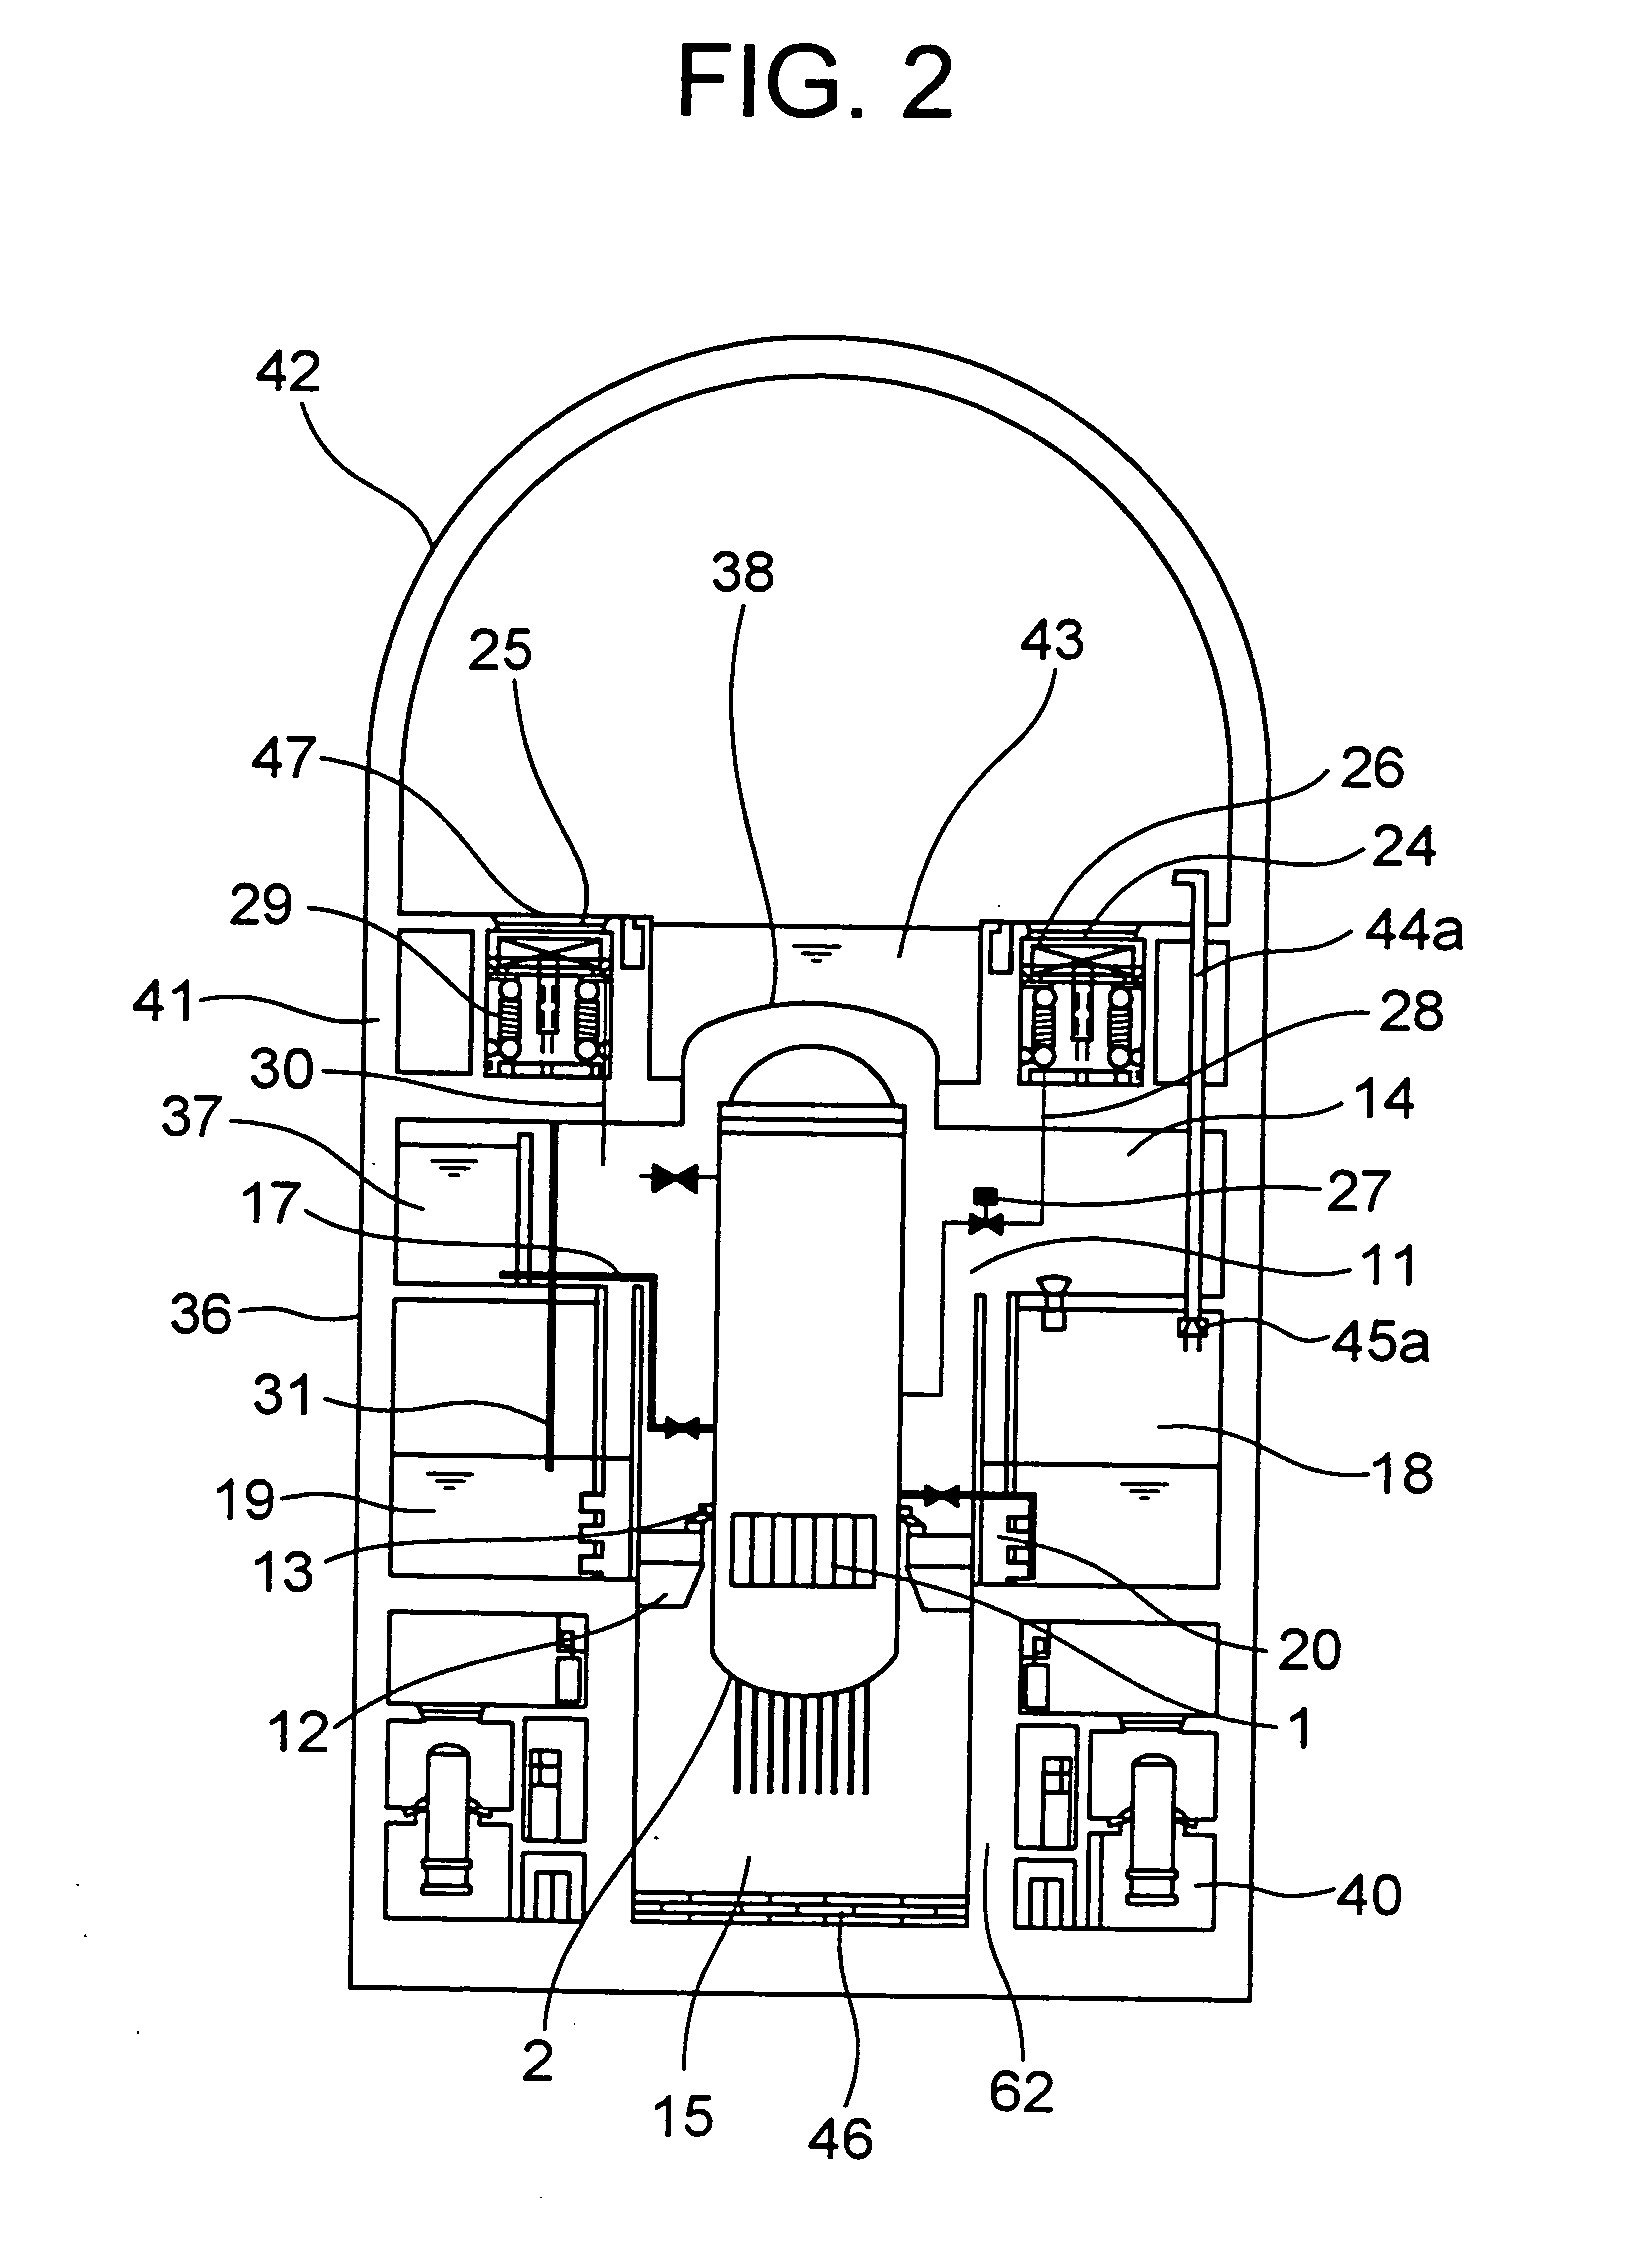 Reactor containment vessel and boiling water reactor power plant